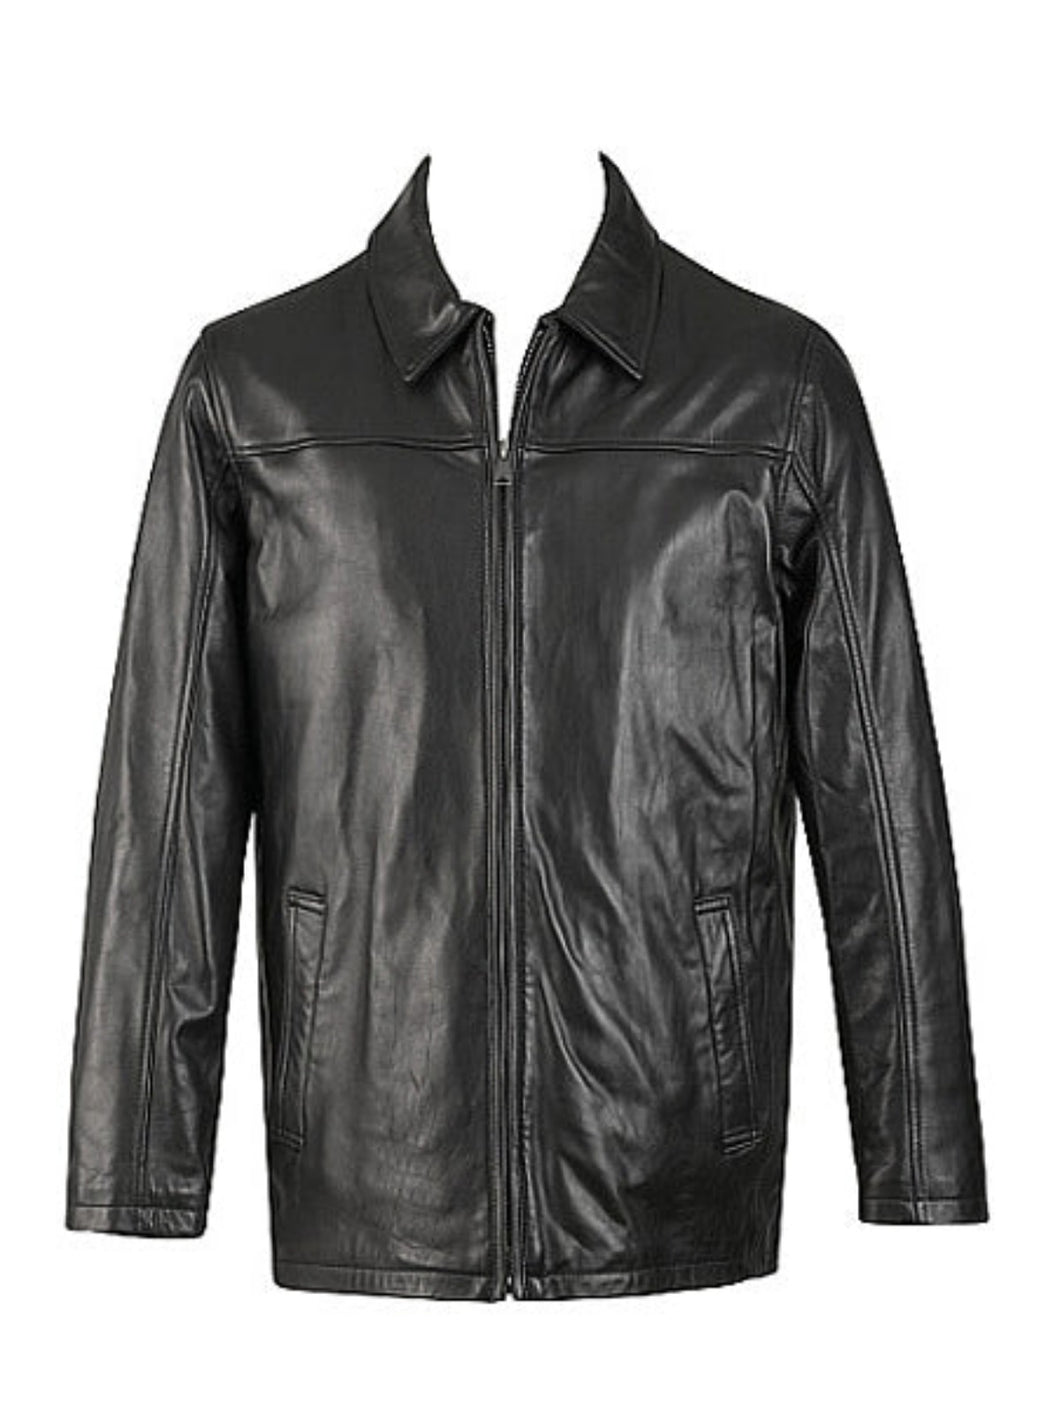 New Mens Big and Tall Motorcycle Black Leather Jacket